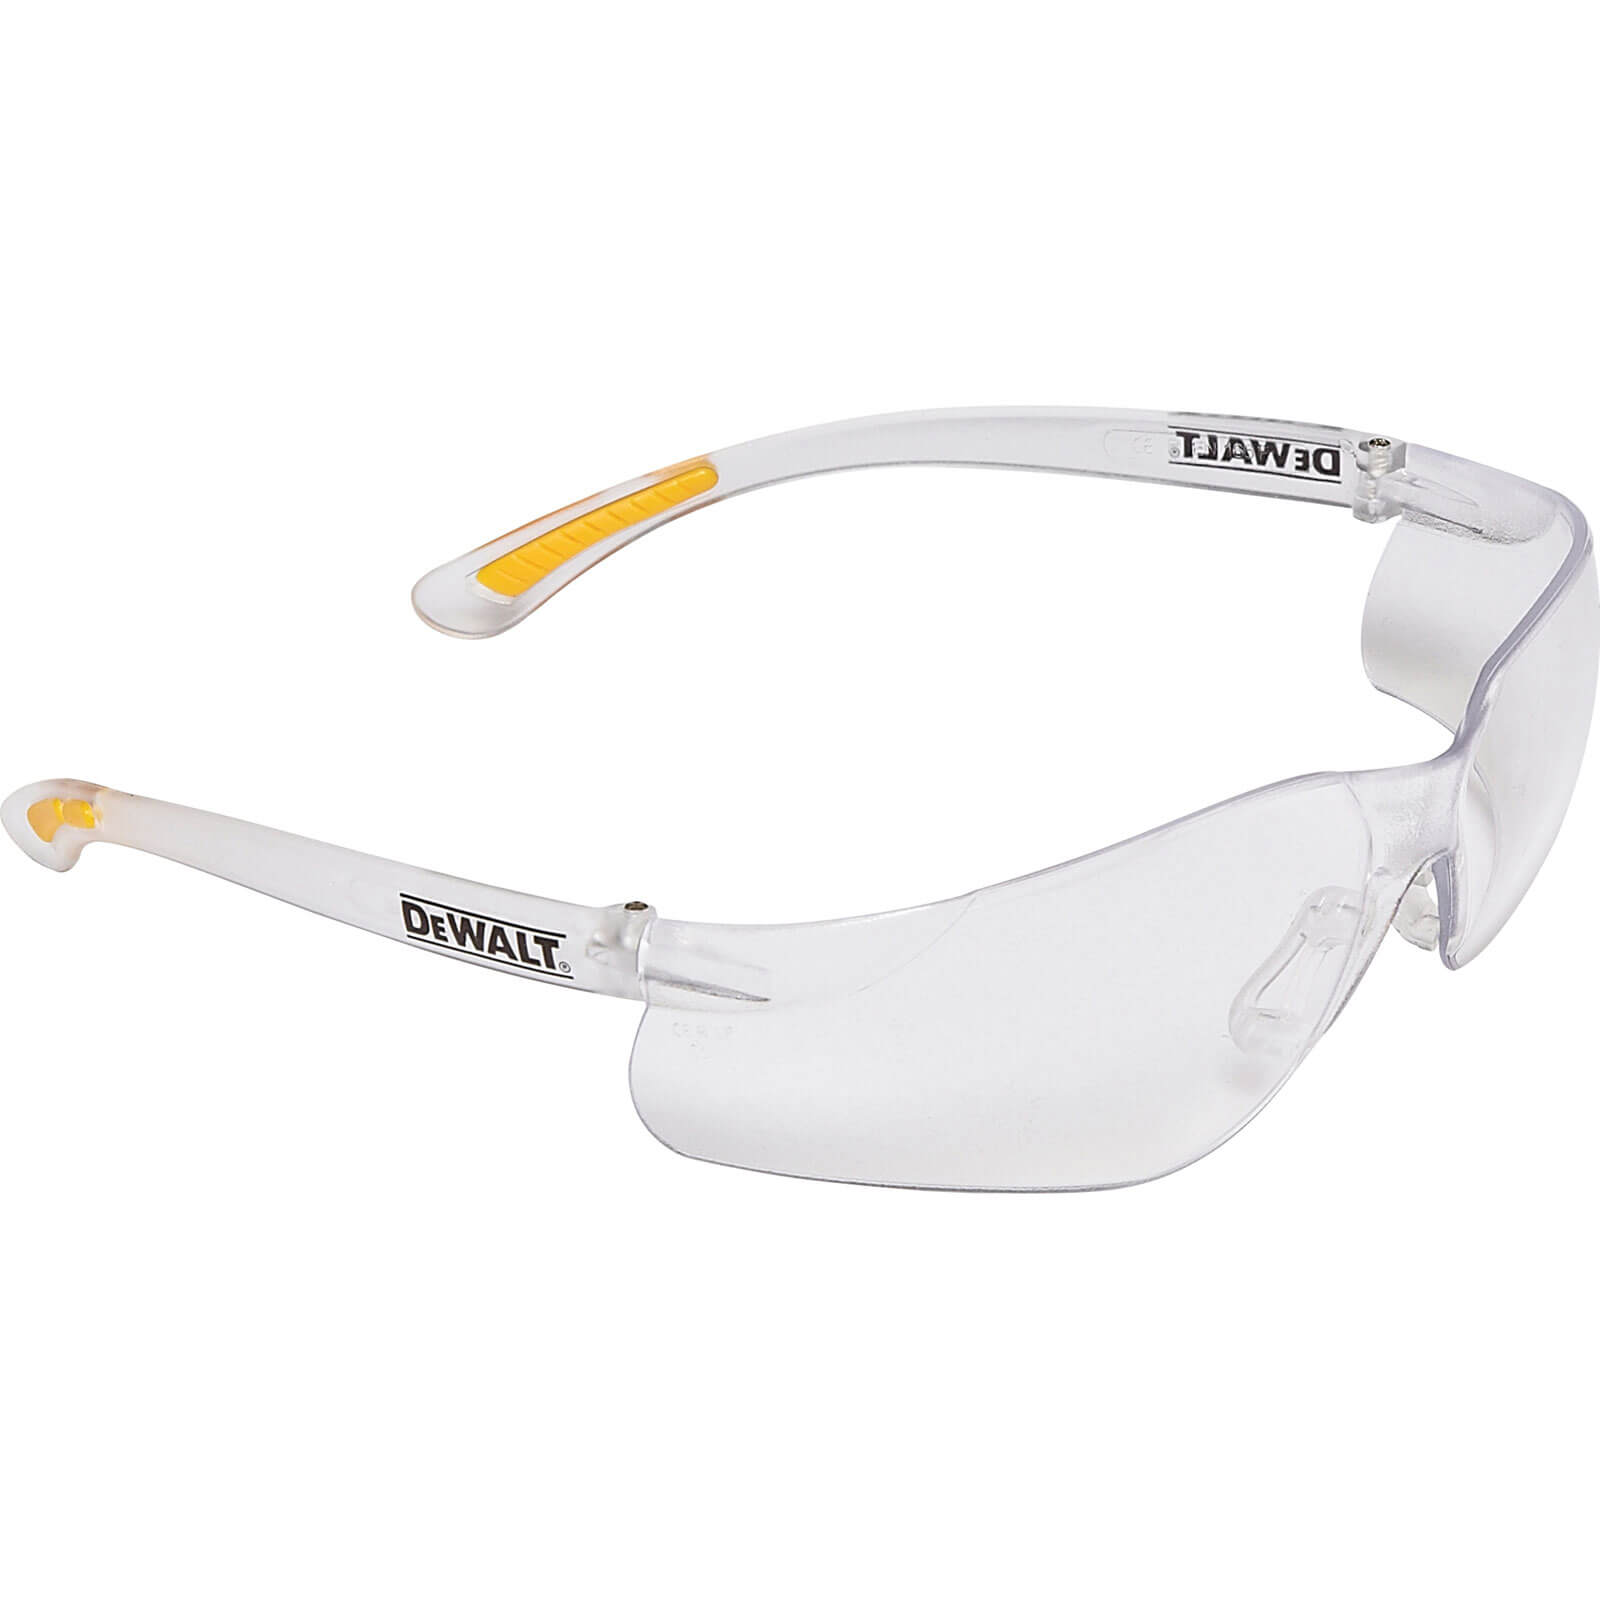 Photo of Dewalt Contractor Pro Safety Glasses